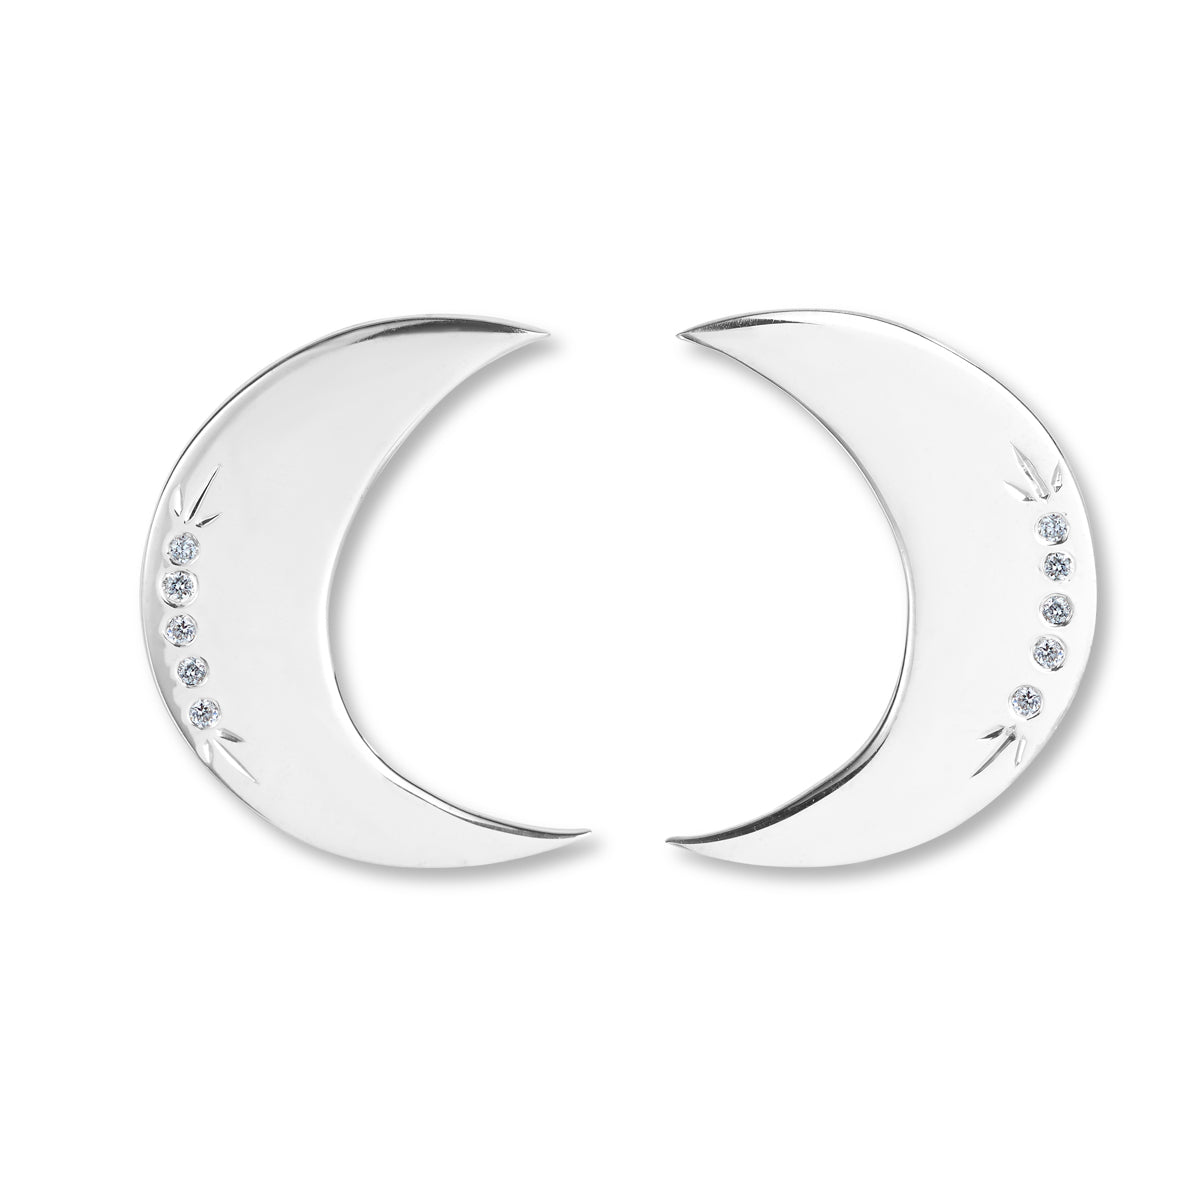 Sterling silver crescent moon earrings with inlaid diamonds